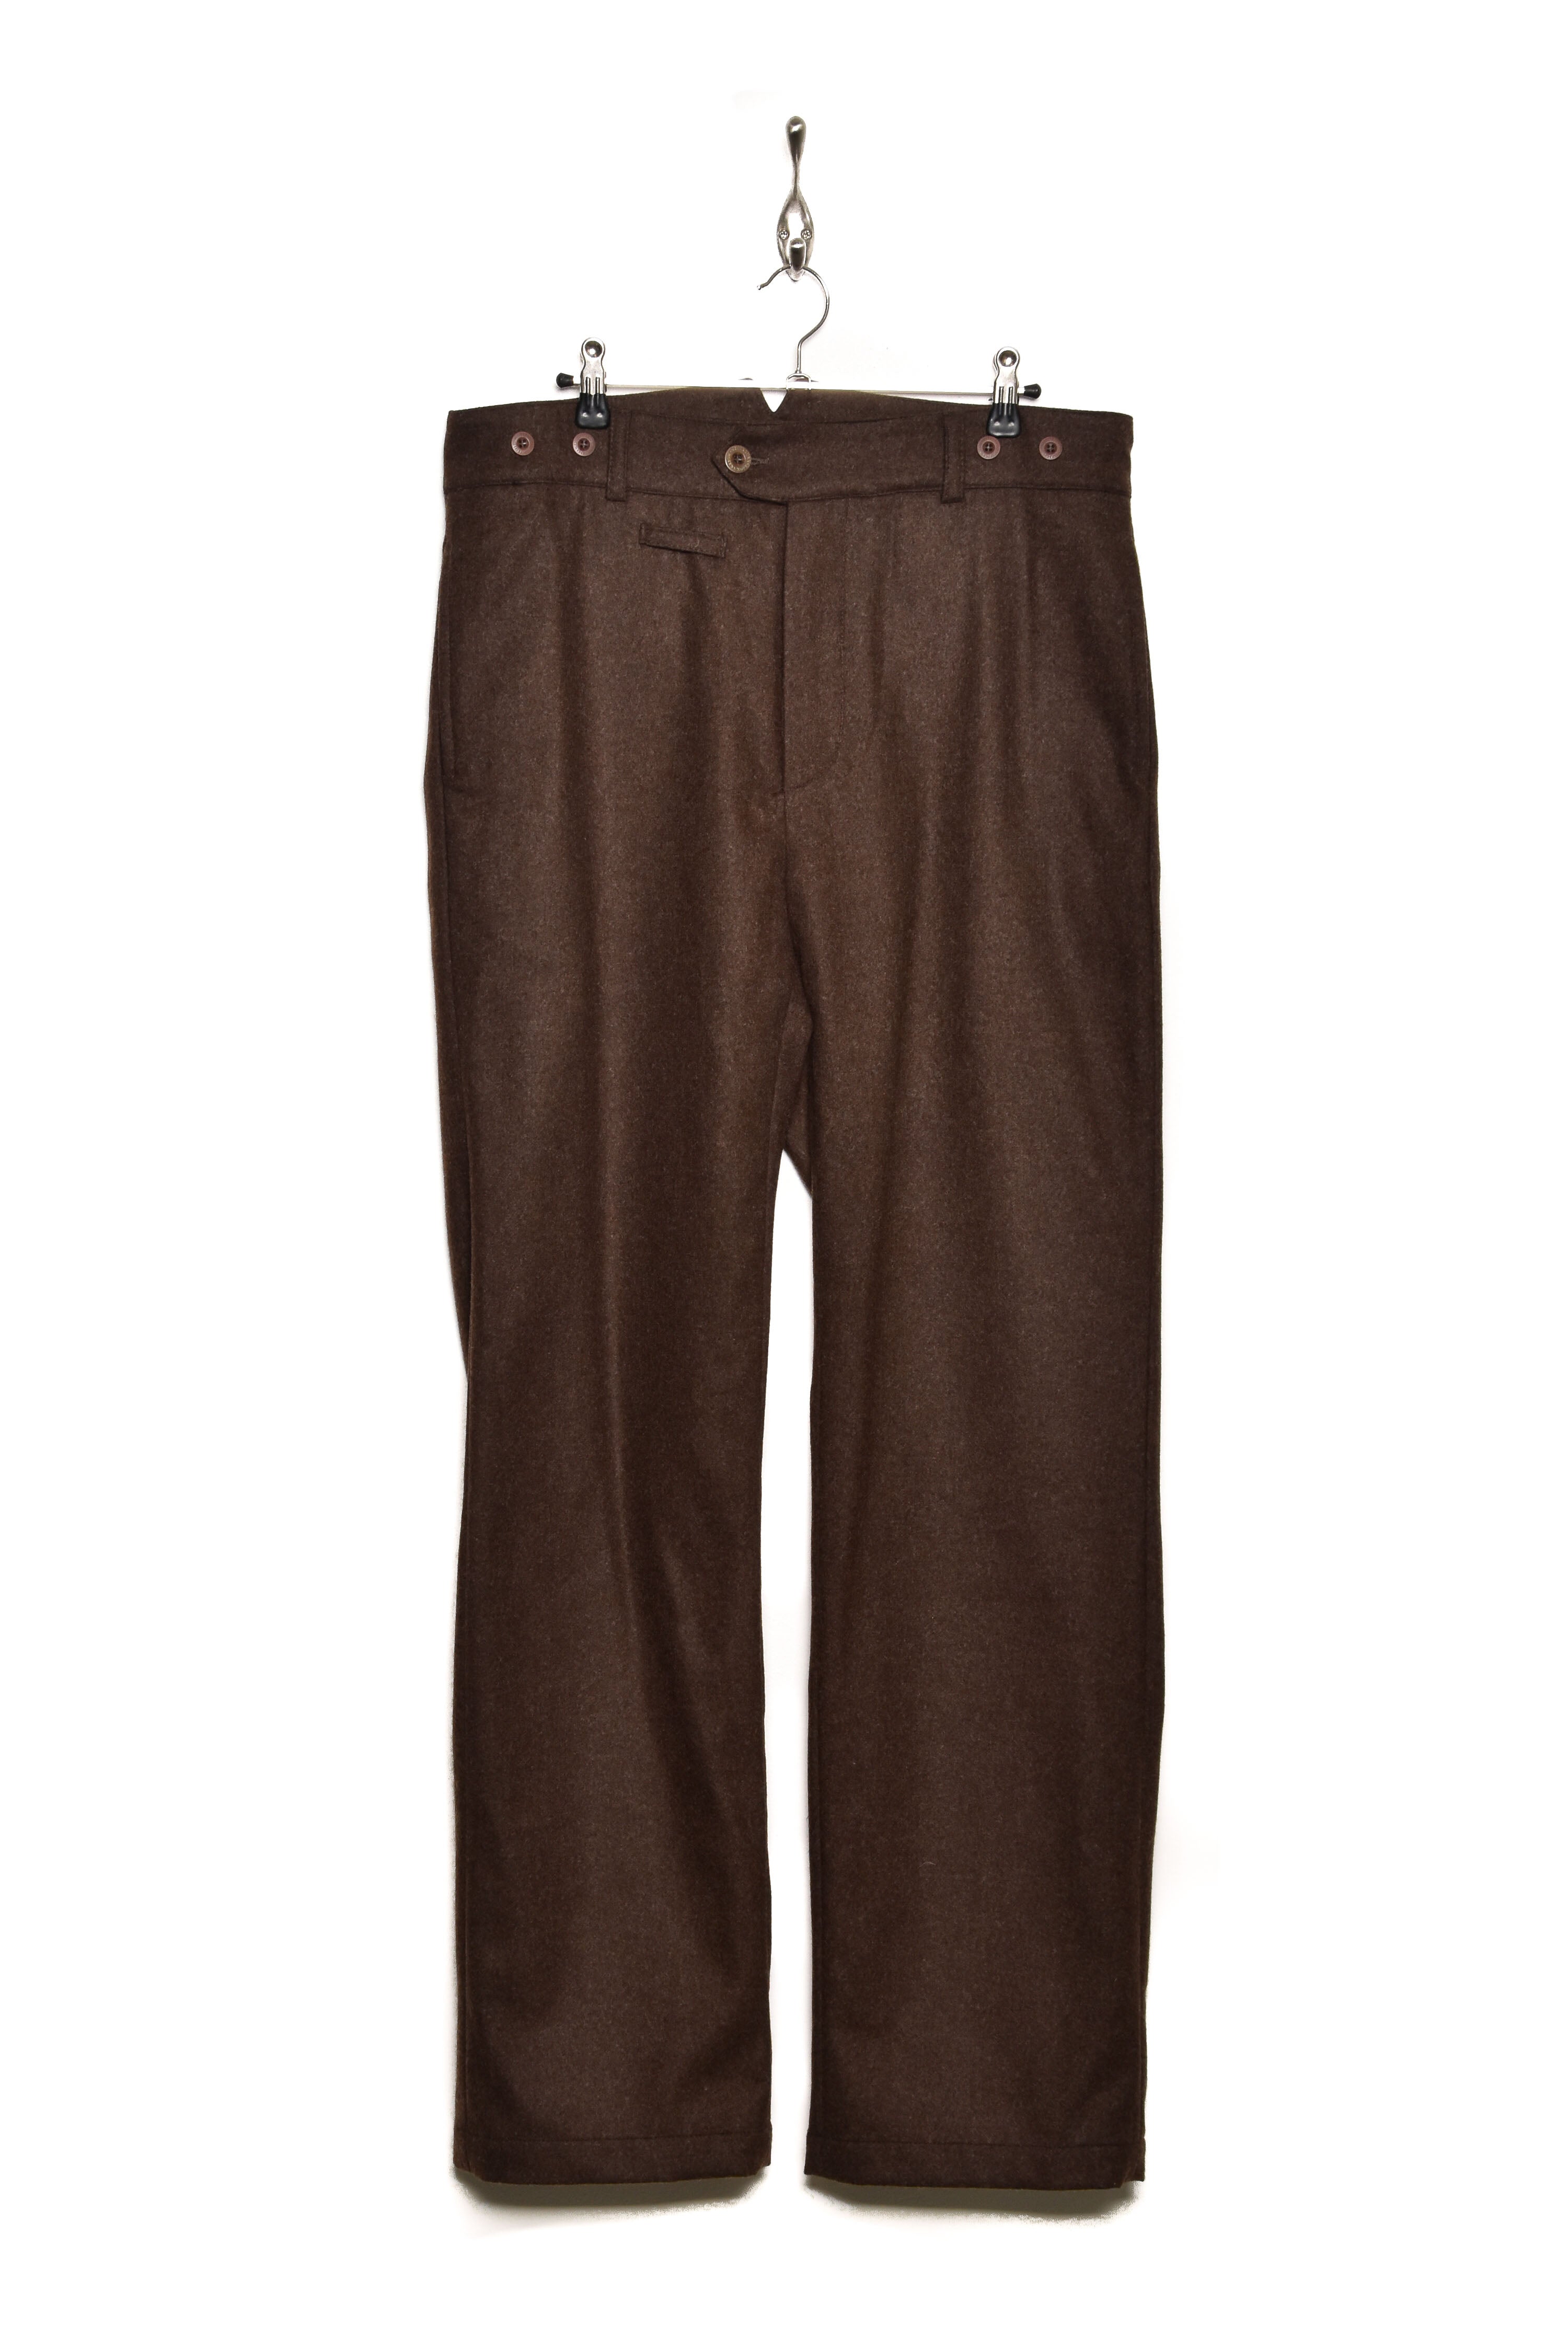 Frank Leder Wool Loden Trousers M007/03 chocolate 84